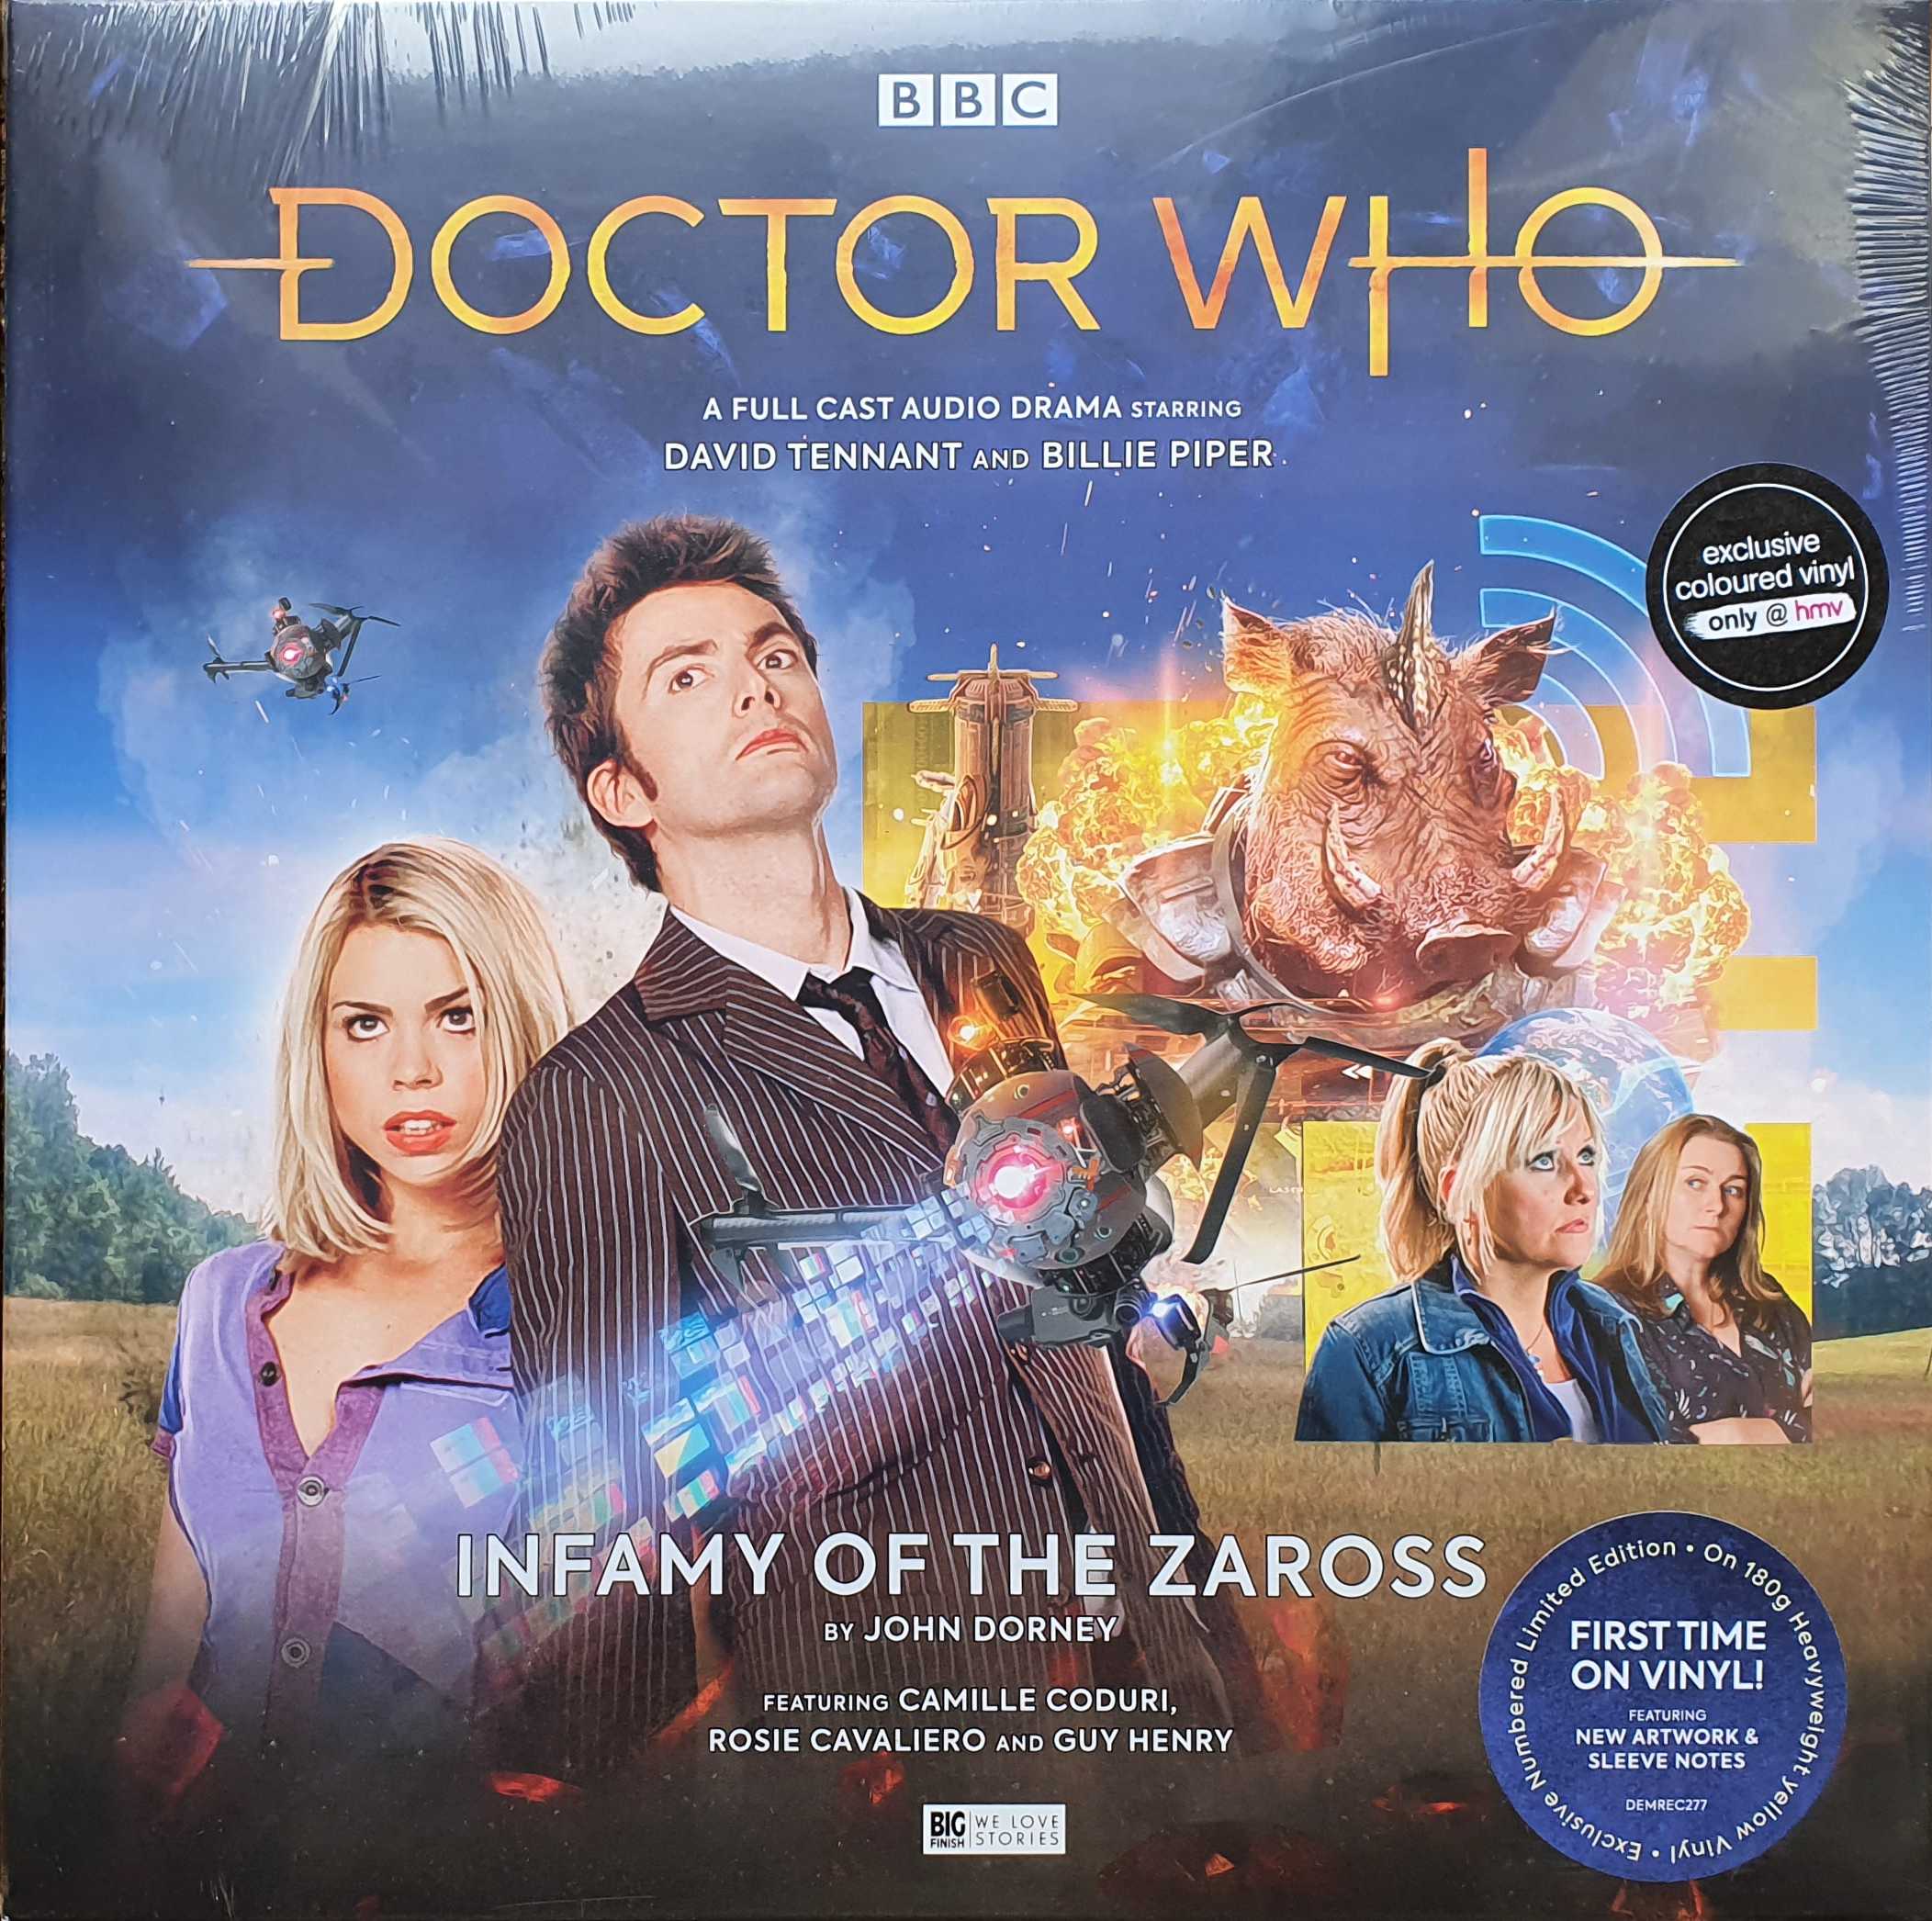 Picture of DEMREC 277 Doctor Who - Infamy of the Zaross by artist John Dorney from the BBC records and Tapes library